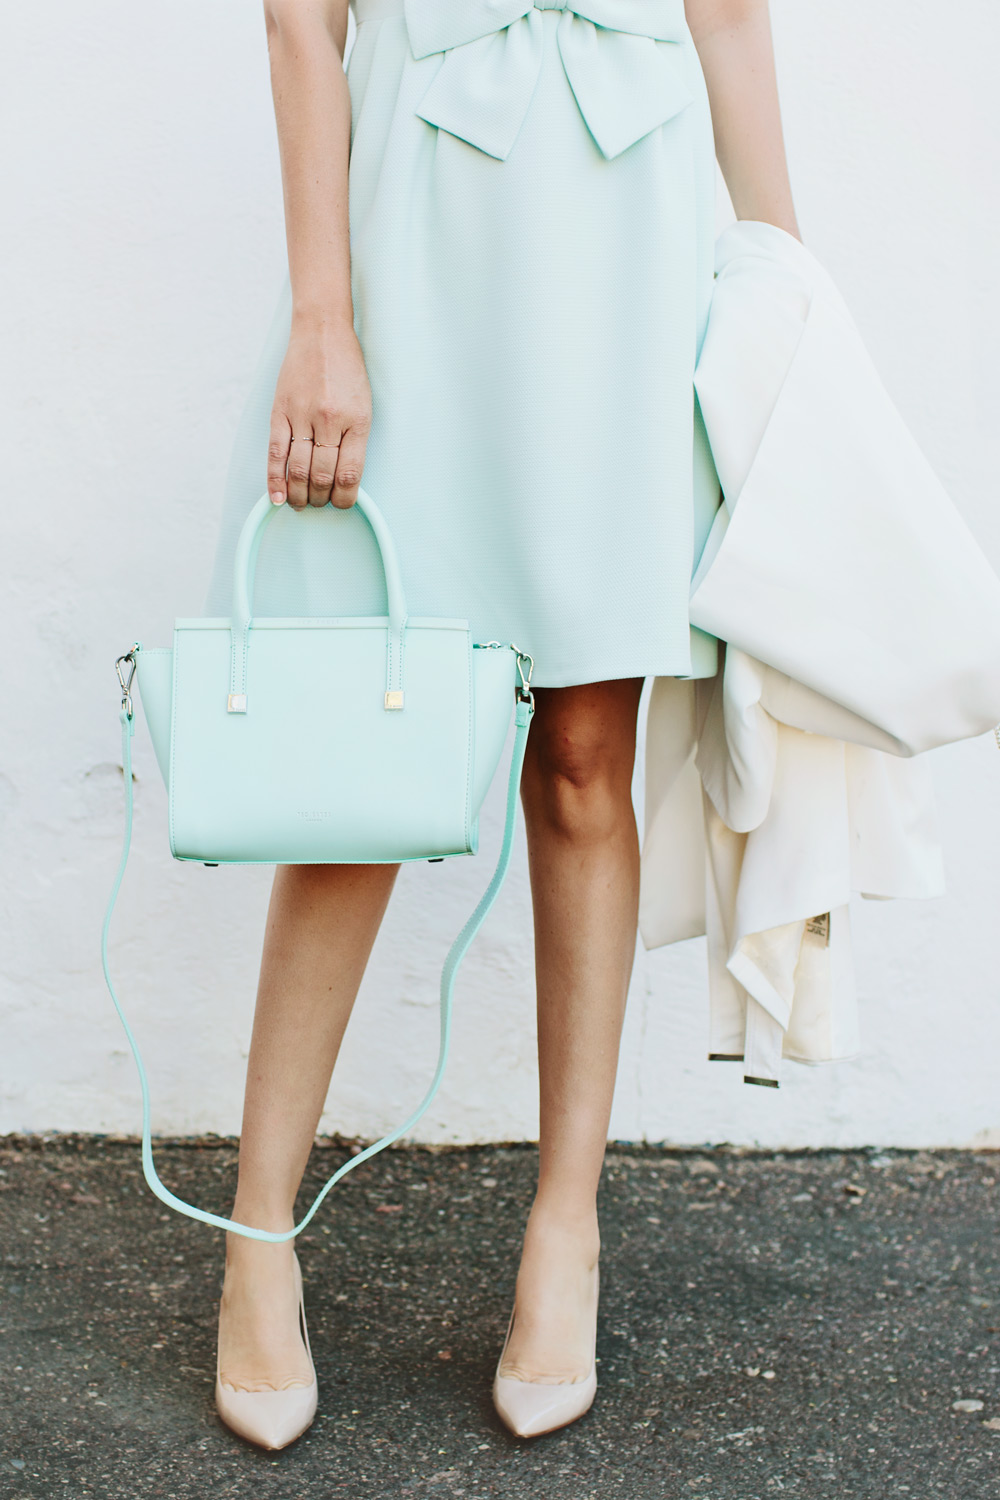 Ted Baker Mint Bow Dress